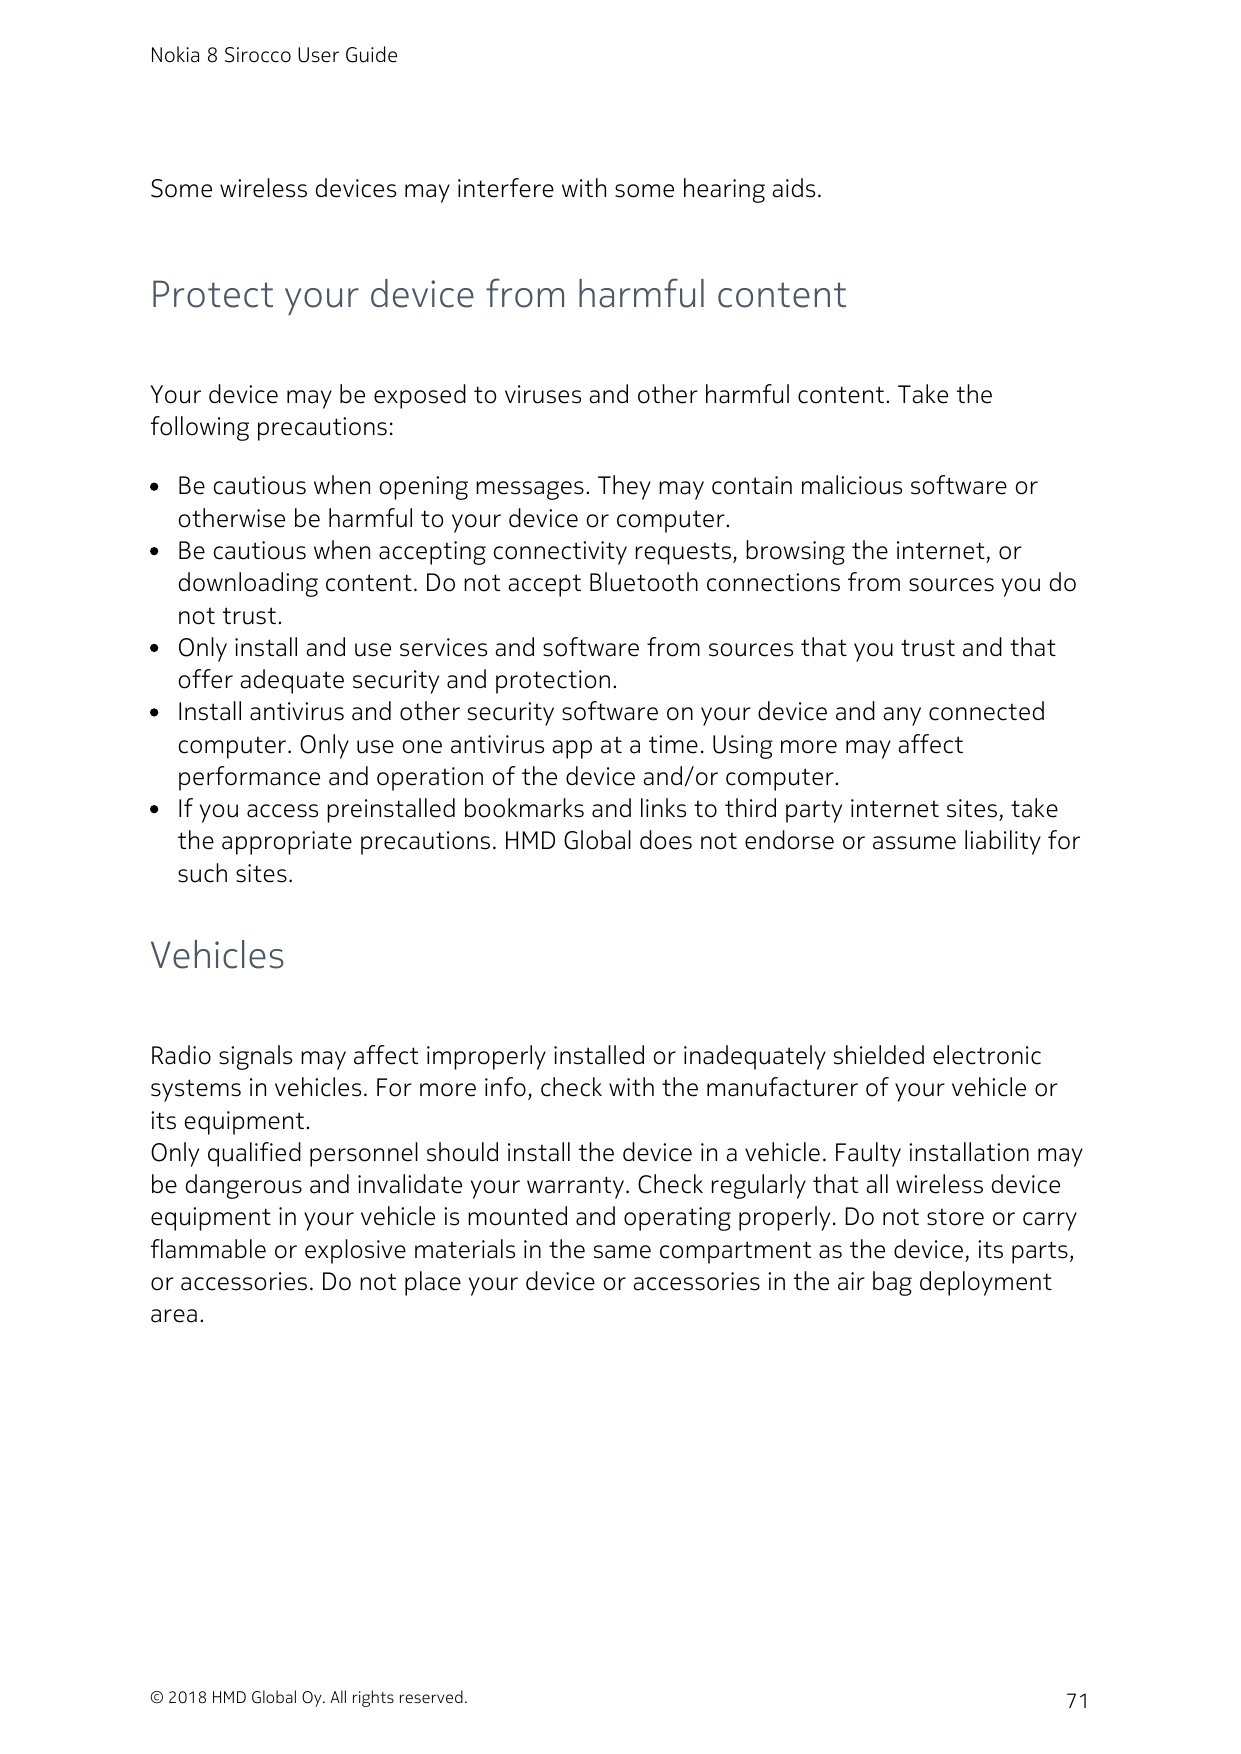 Nokia 8 Sirocco User GuideSome wireless devices may interfere with some hearing aids.Protect your device from harmful contentYou